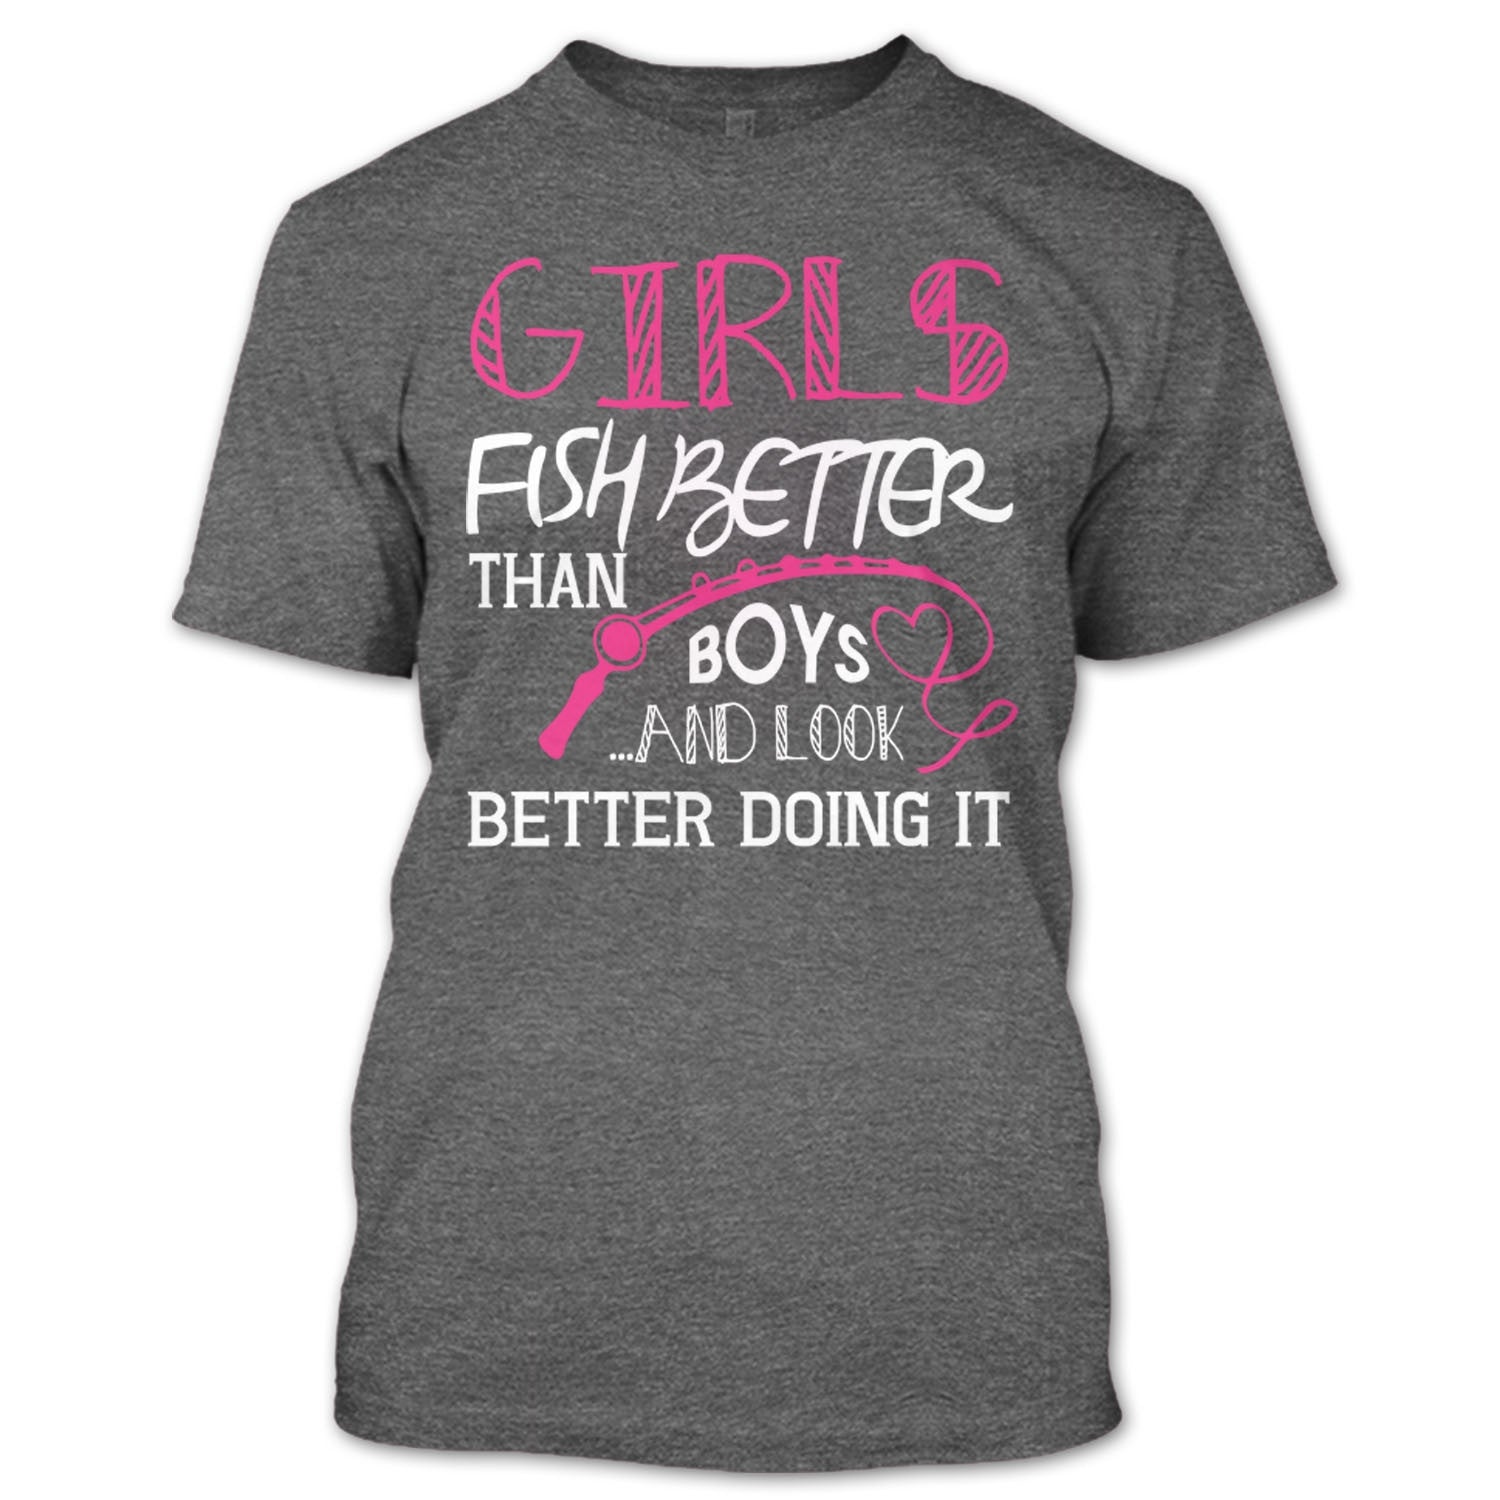 Girls Fish Better Than Boys And Look Better Dong It T Shirt, Fishing L –  Premium Fan Store